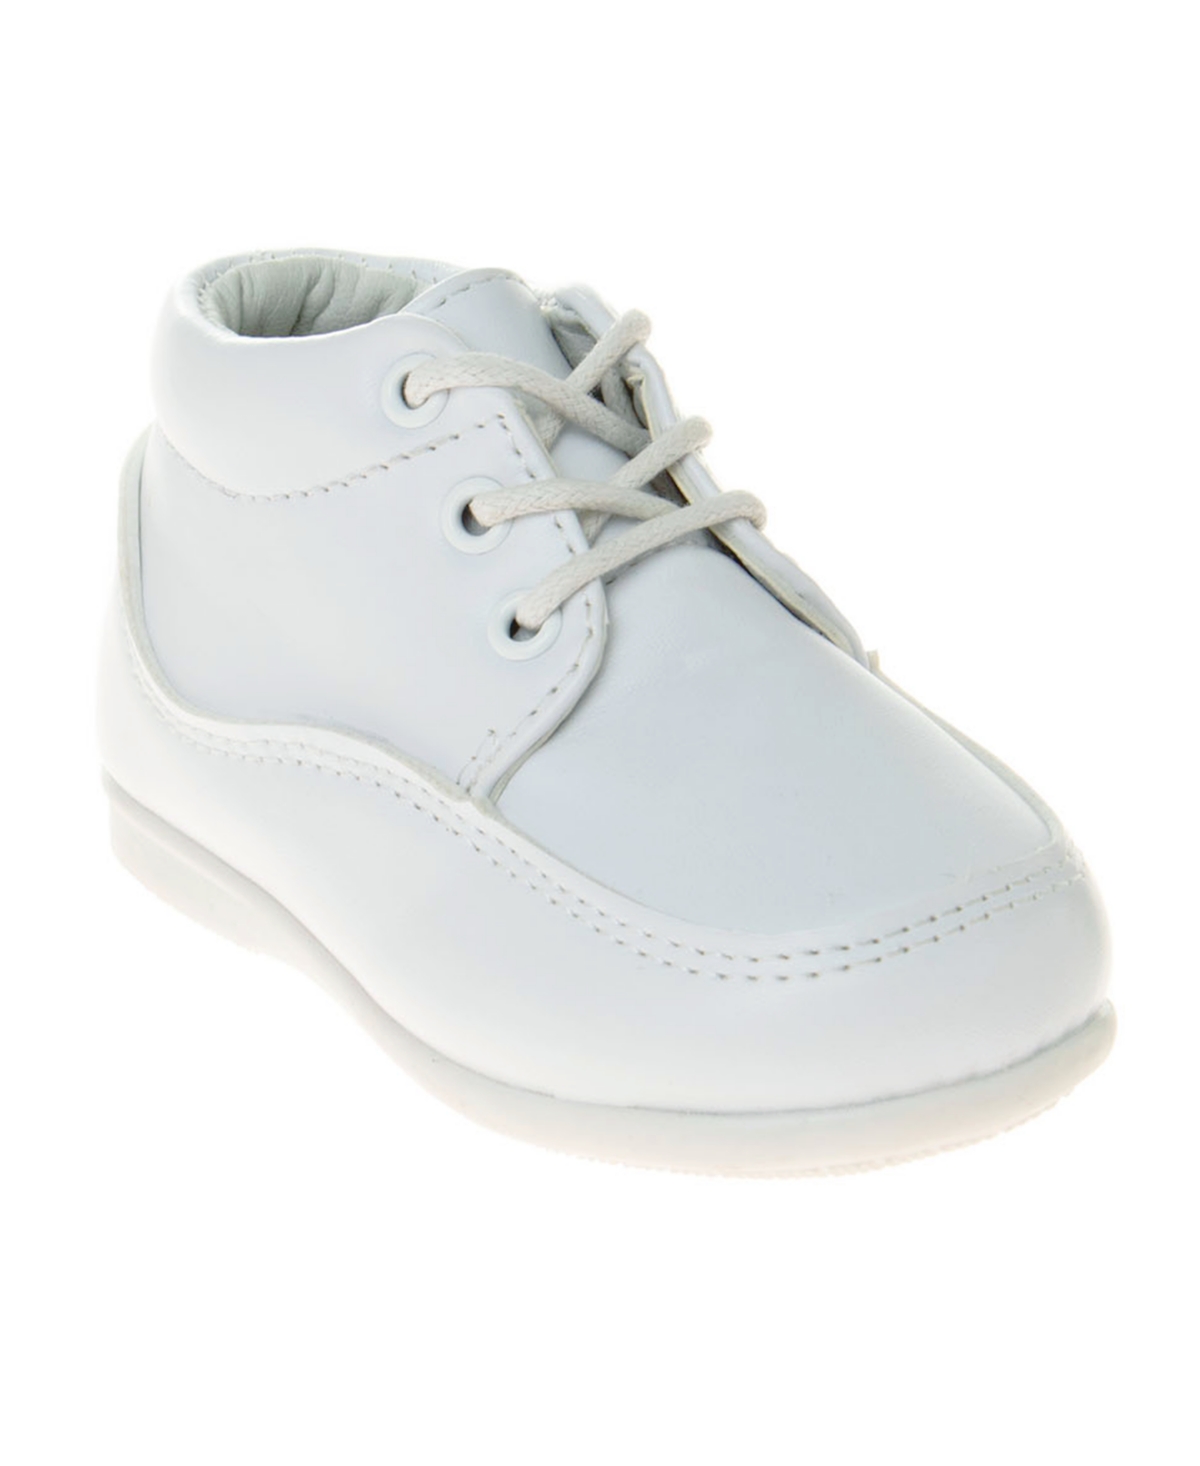 Josmo Kids' Toddler Boys Lace Up Dress Shoes In White